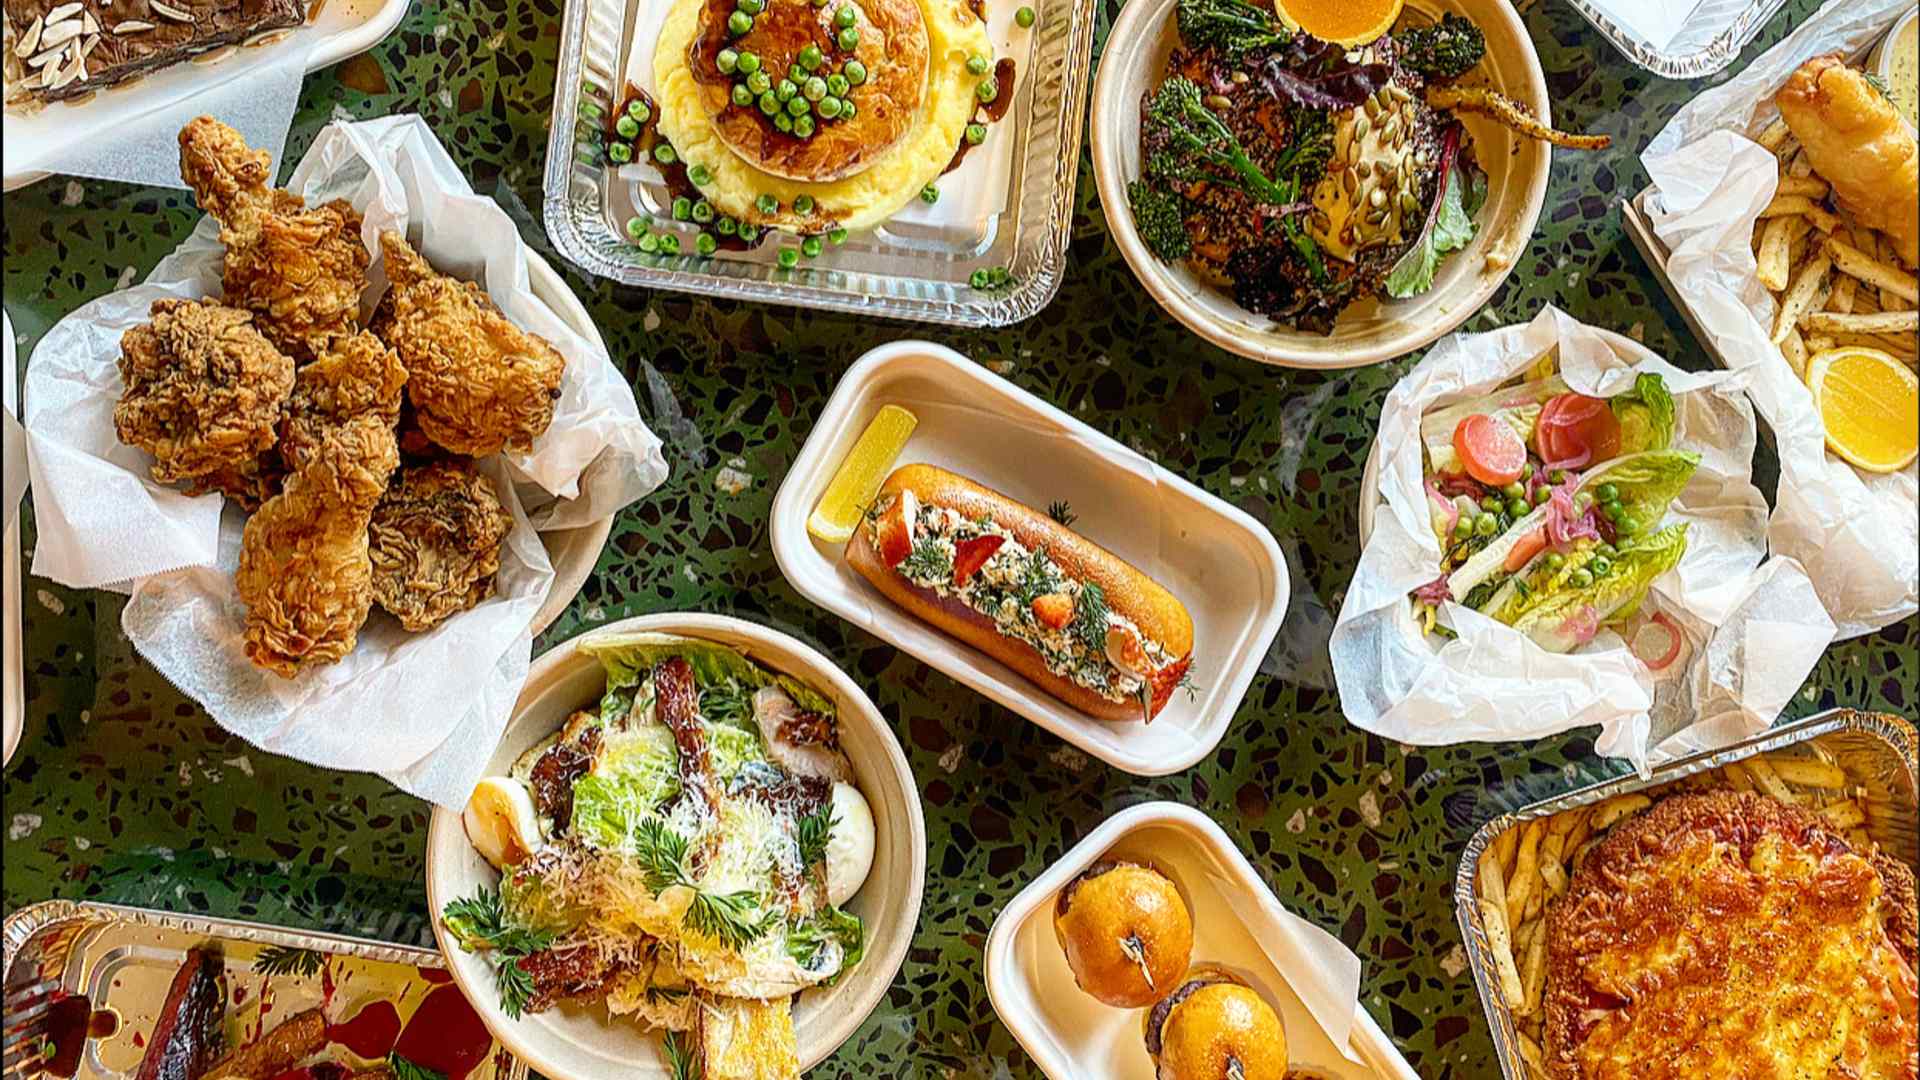 Hand Picked Is the New Melbourne Service Delivering Dishes from 30 Pubs, Bars and Restaurants